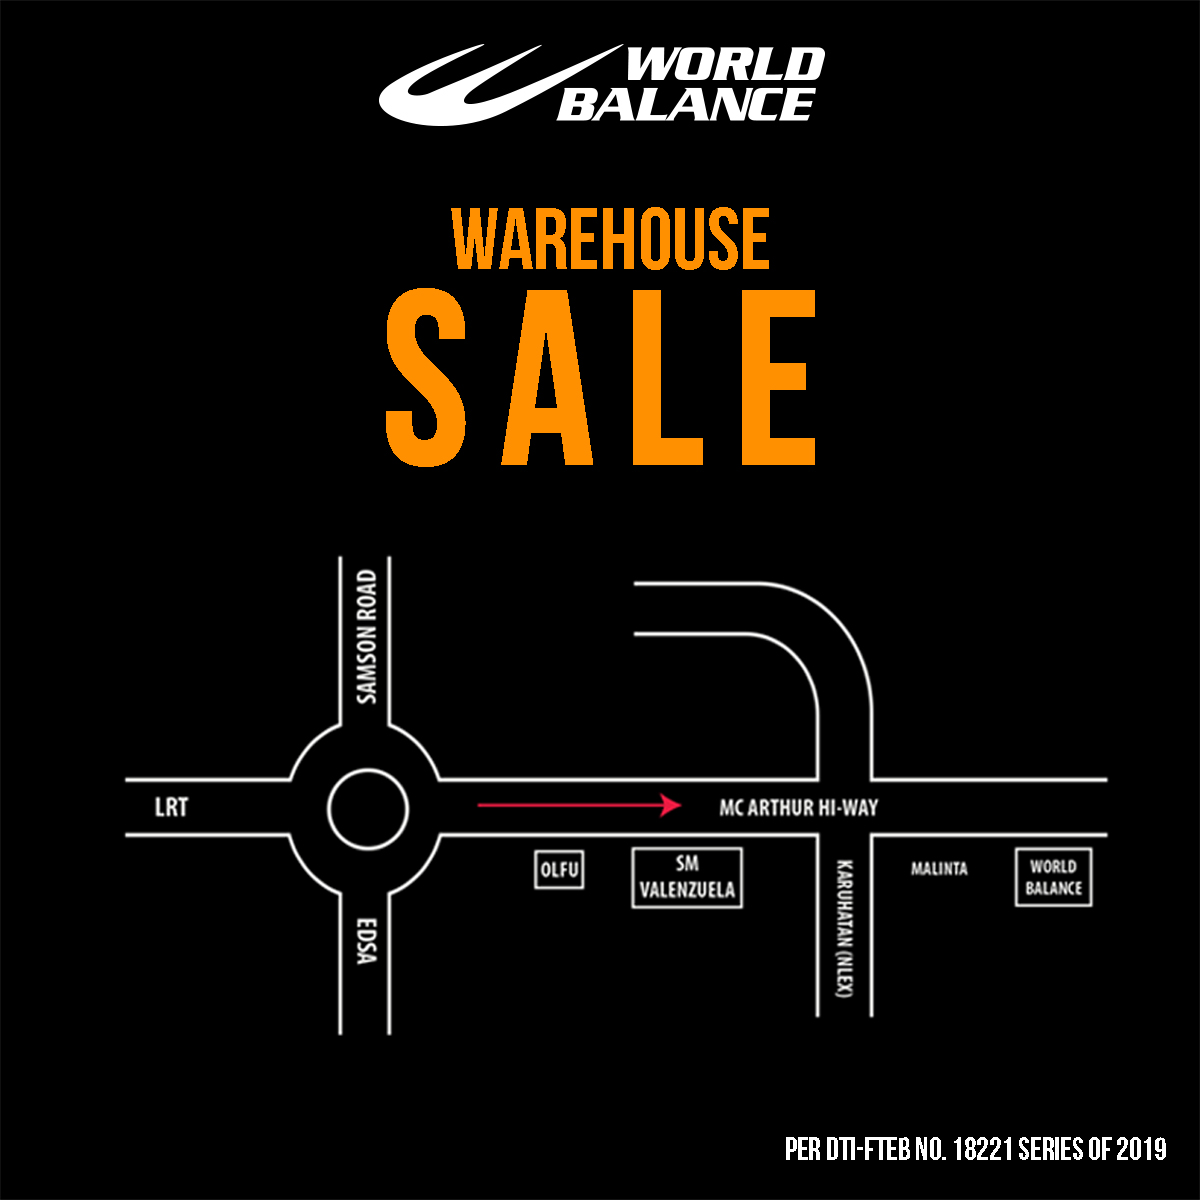 World Balance October Warehouse Sale 2019 - Up to 70% OFF